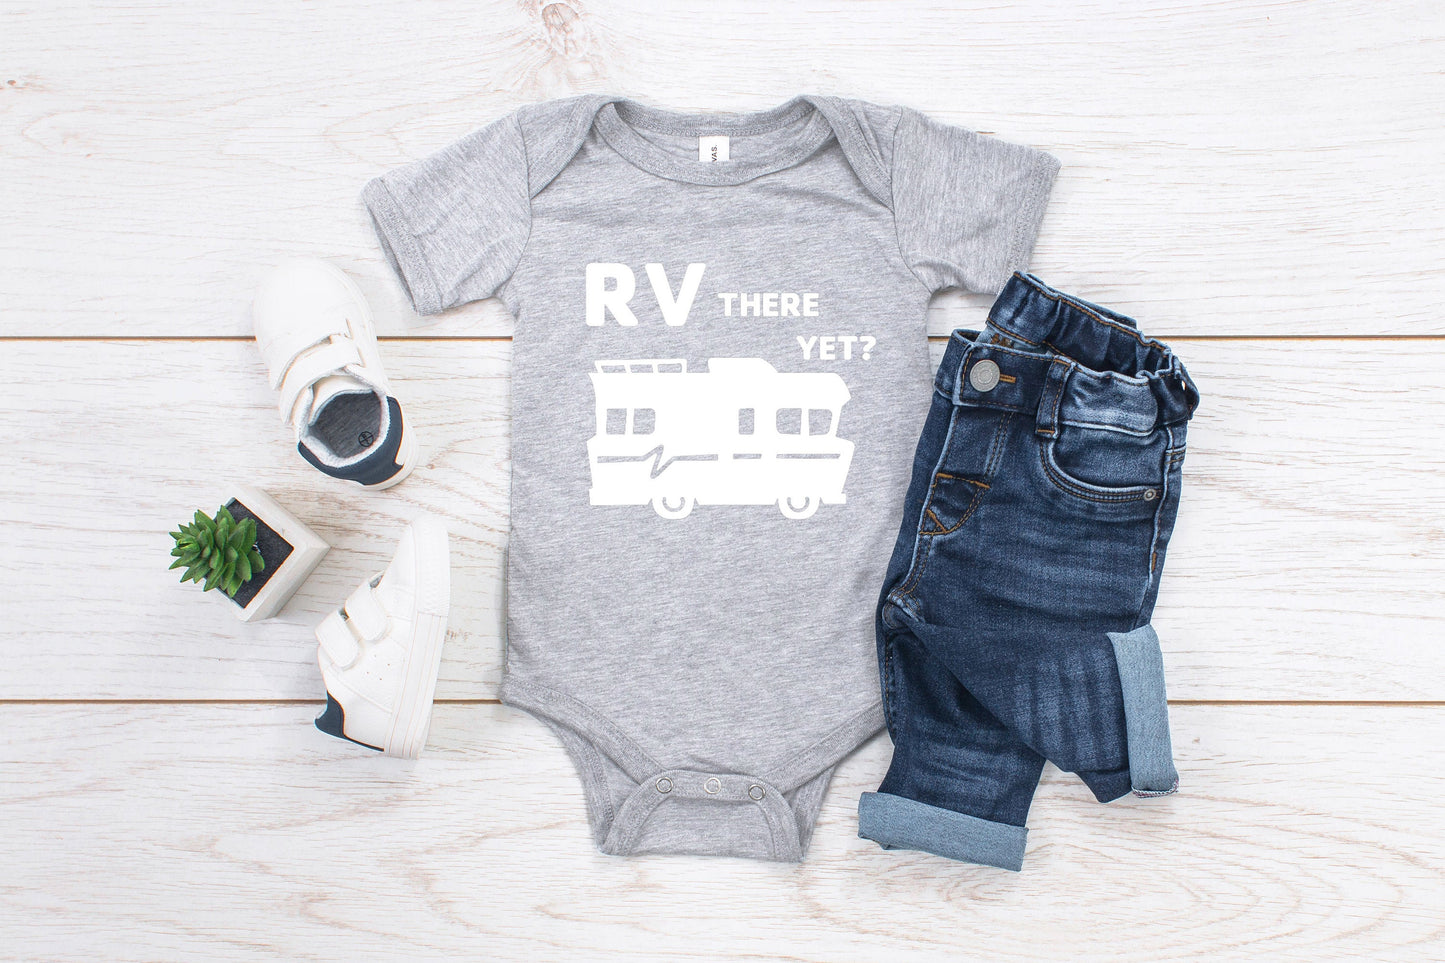 RV There Yet? Caravan Adult/ Toddler/ Baby T-Shirt/ Romper